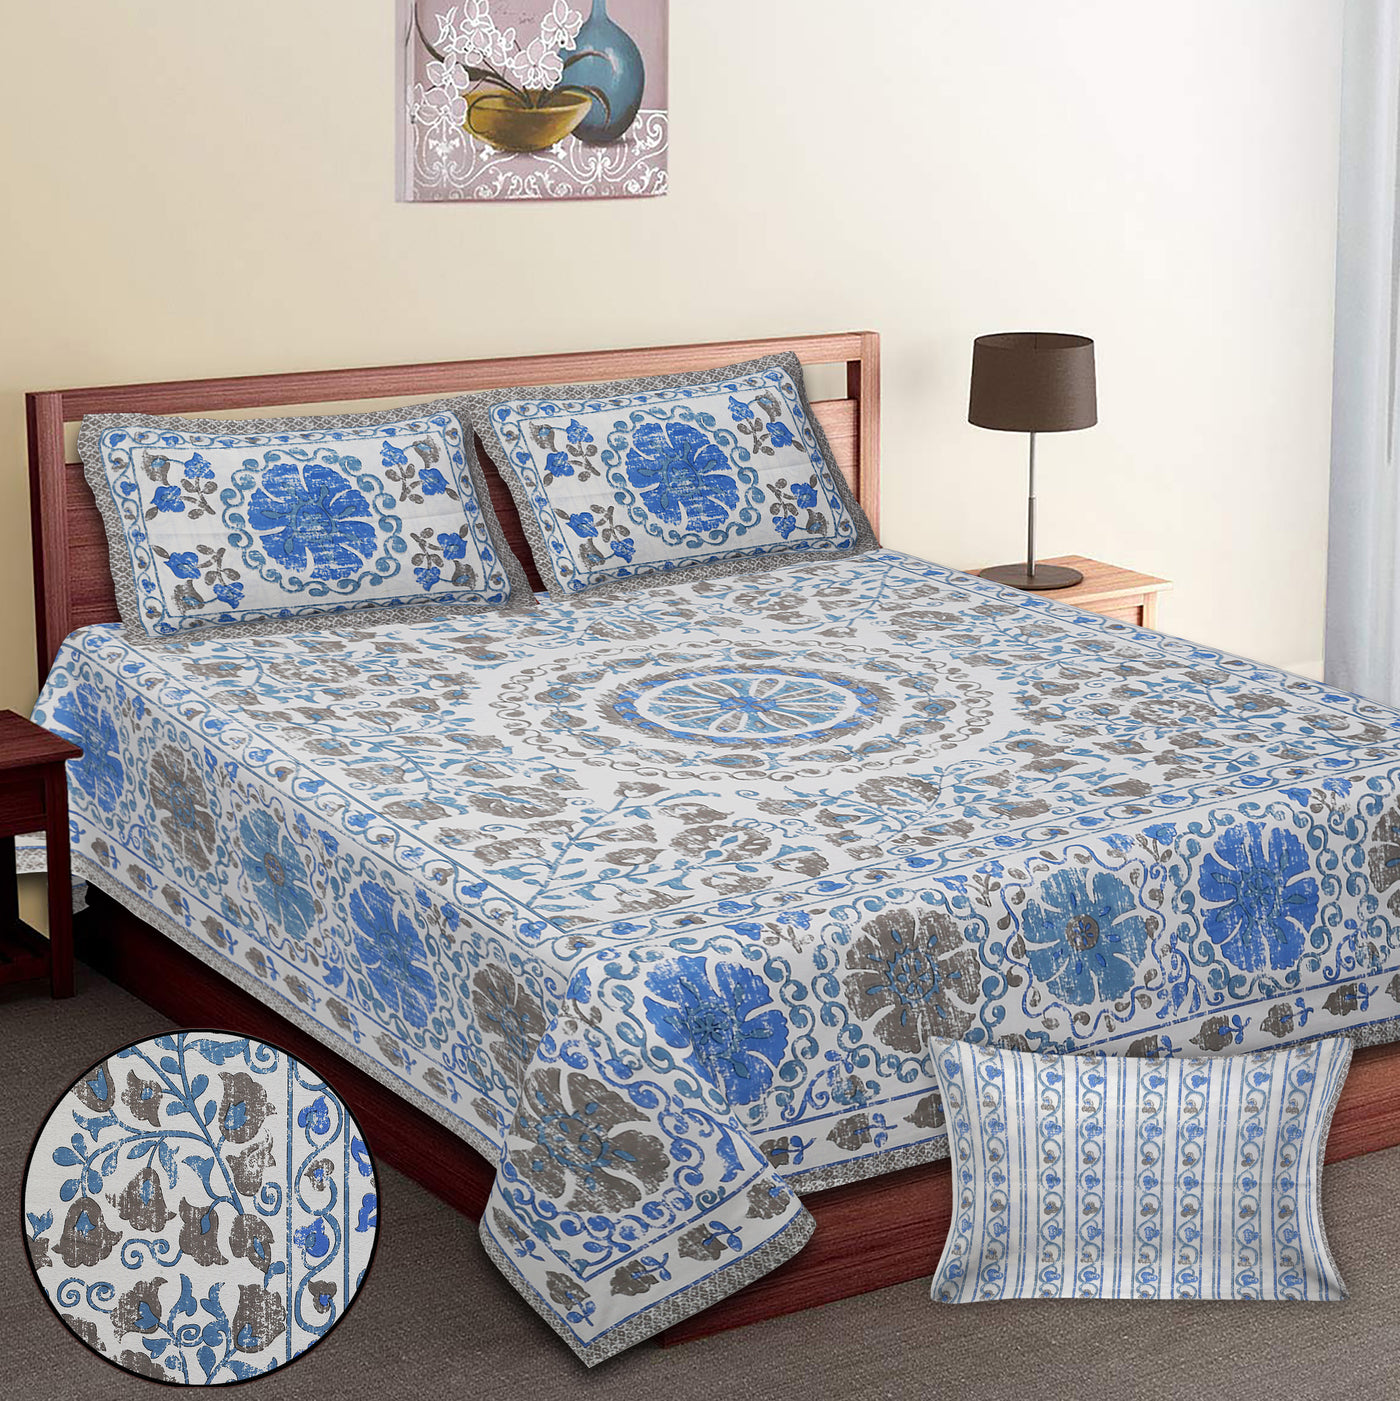 Wanderlust Premium | Medium Size 70 x 100 in | 100% Pure Cotton | Double Bedsheet with 2 Pillow Covers (ART7001)